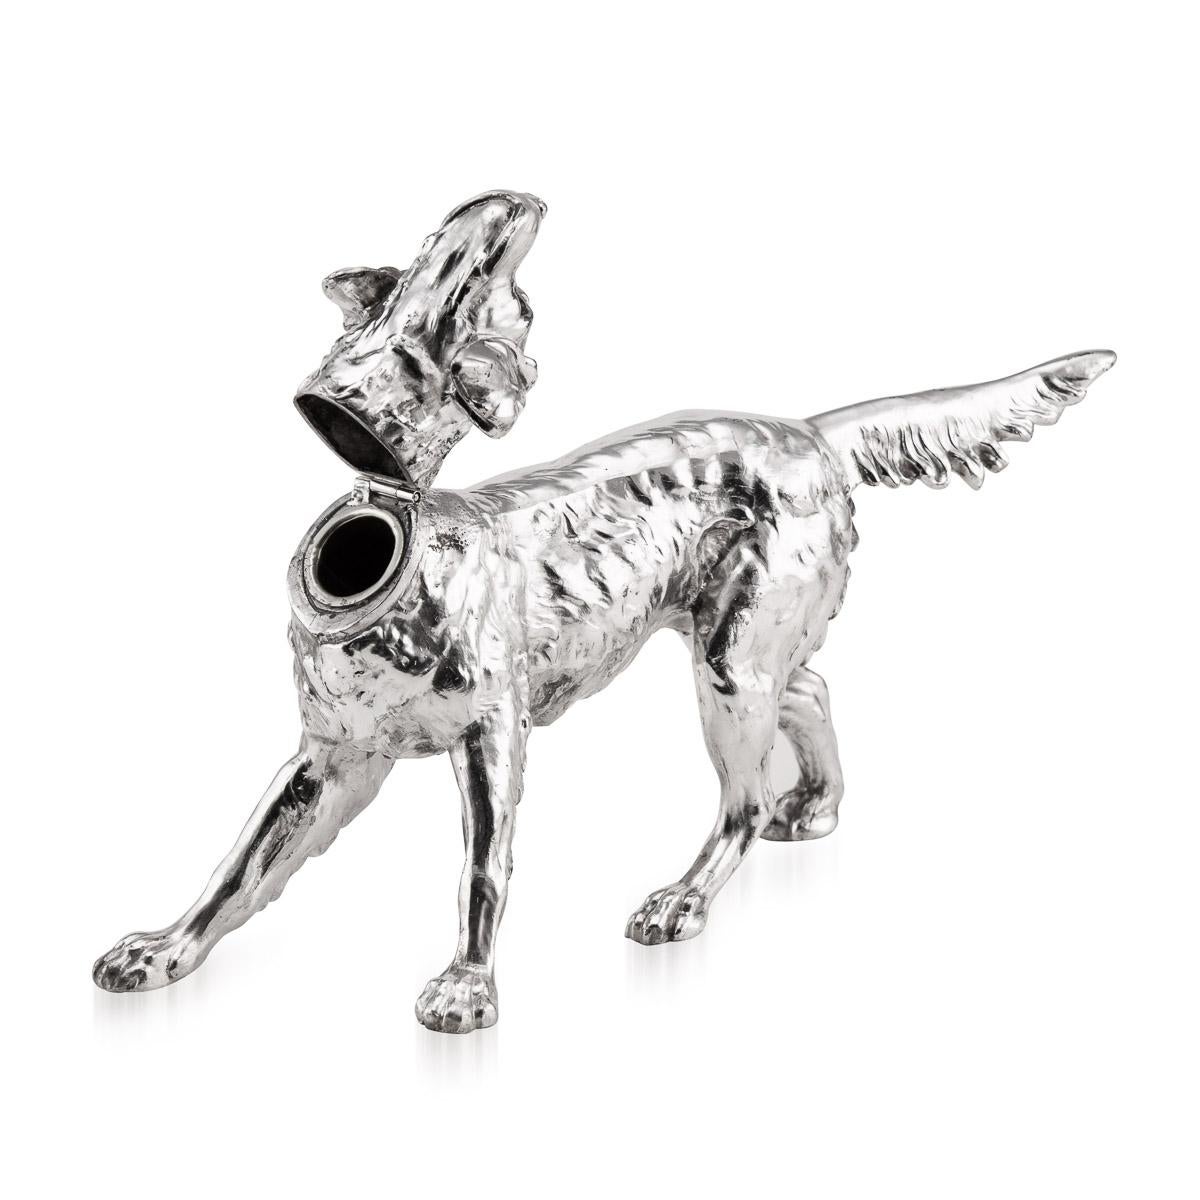 20th Century Silver Plated Statue of a Retriever Dog, C.1920 For Sale 1